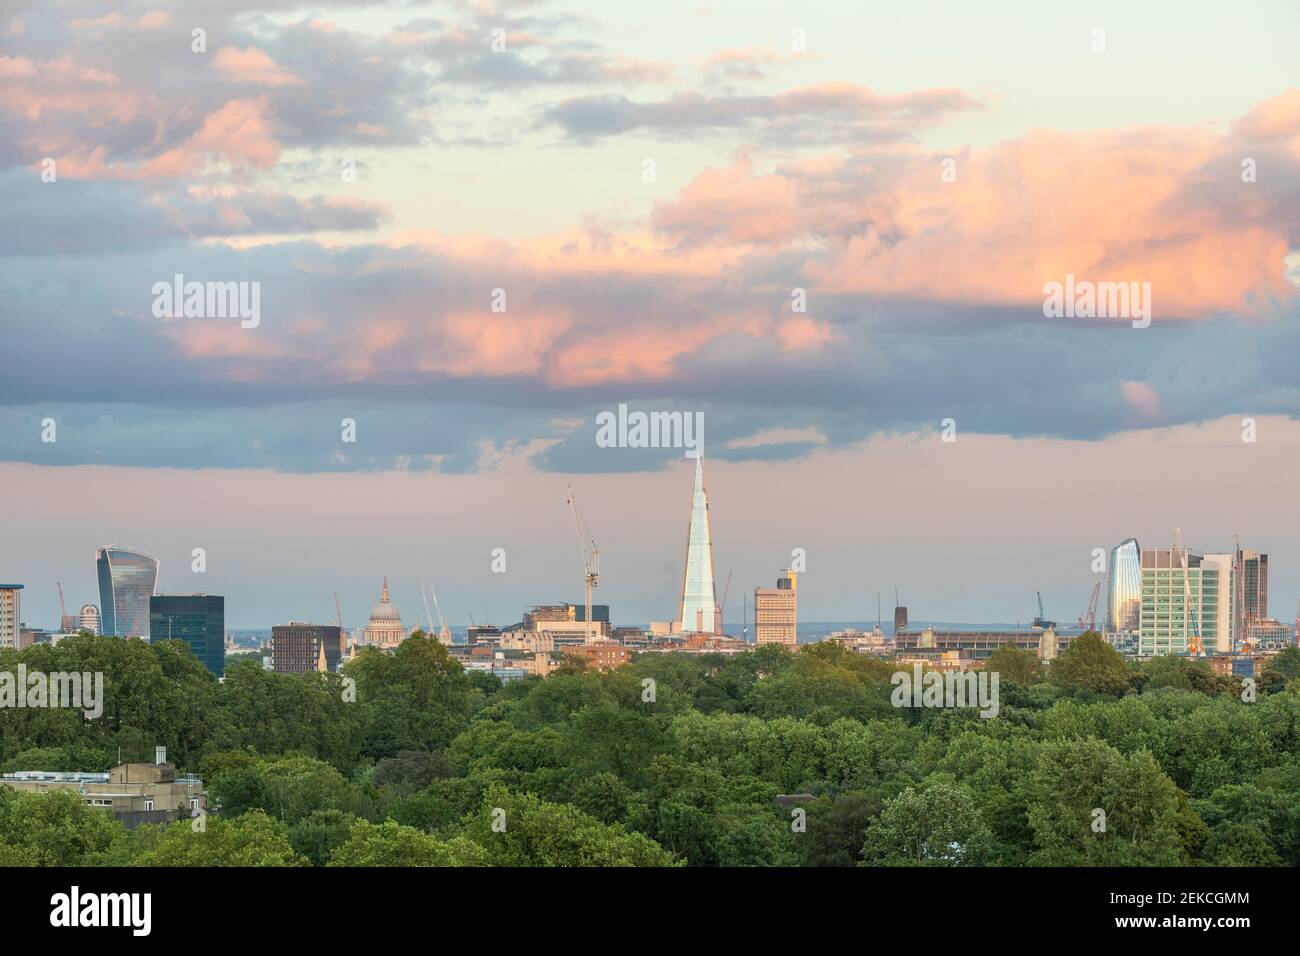 UK, England, London, Clouds over city skyline seen from Primrose Hill park Stock Photo